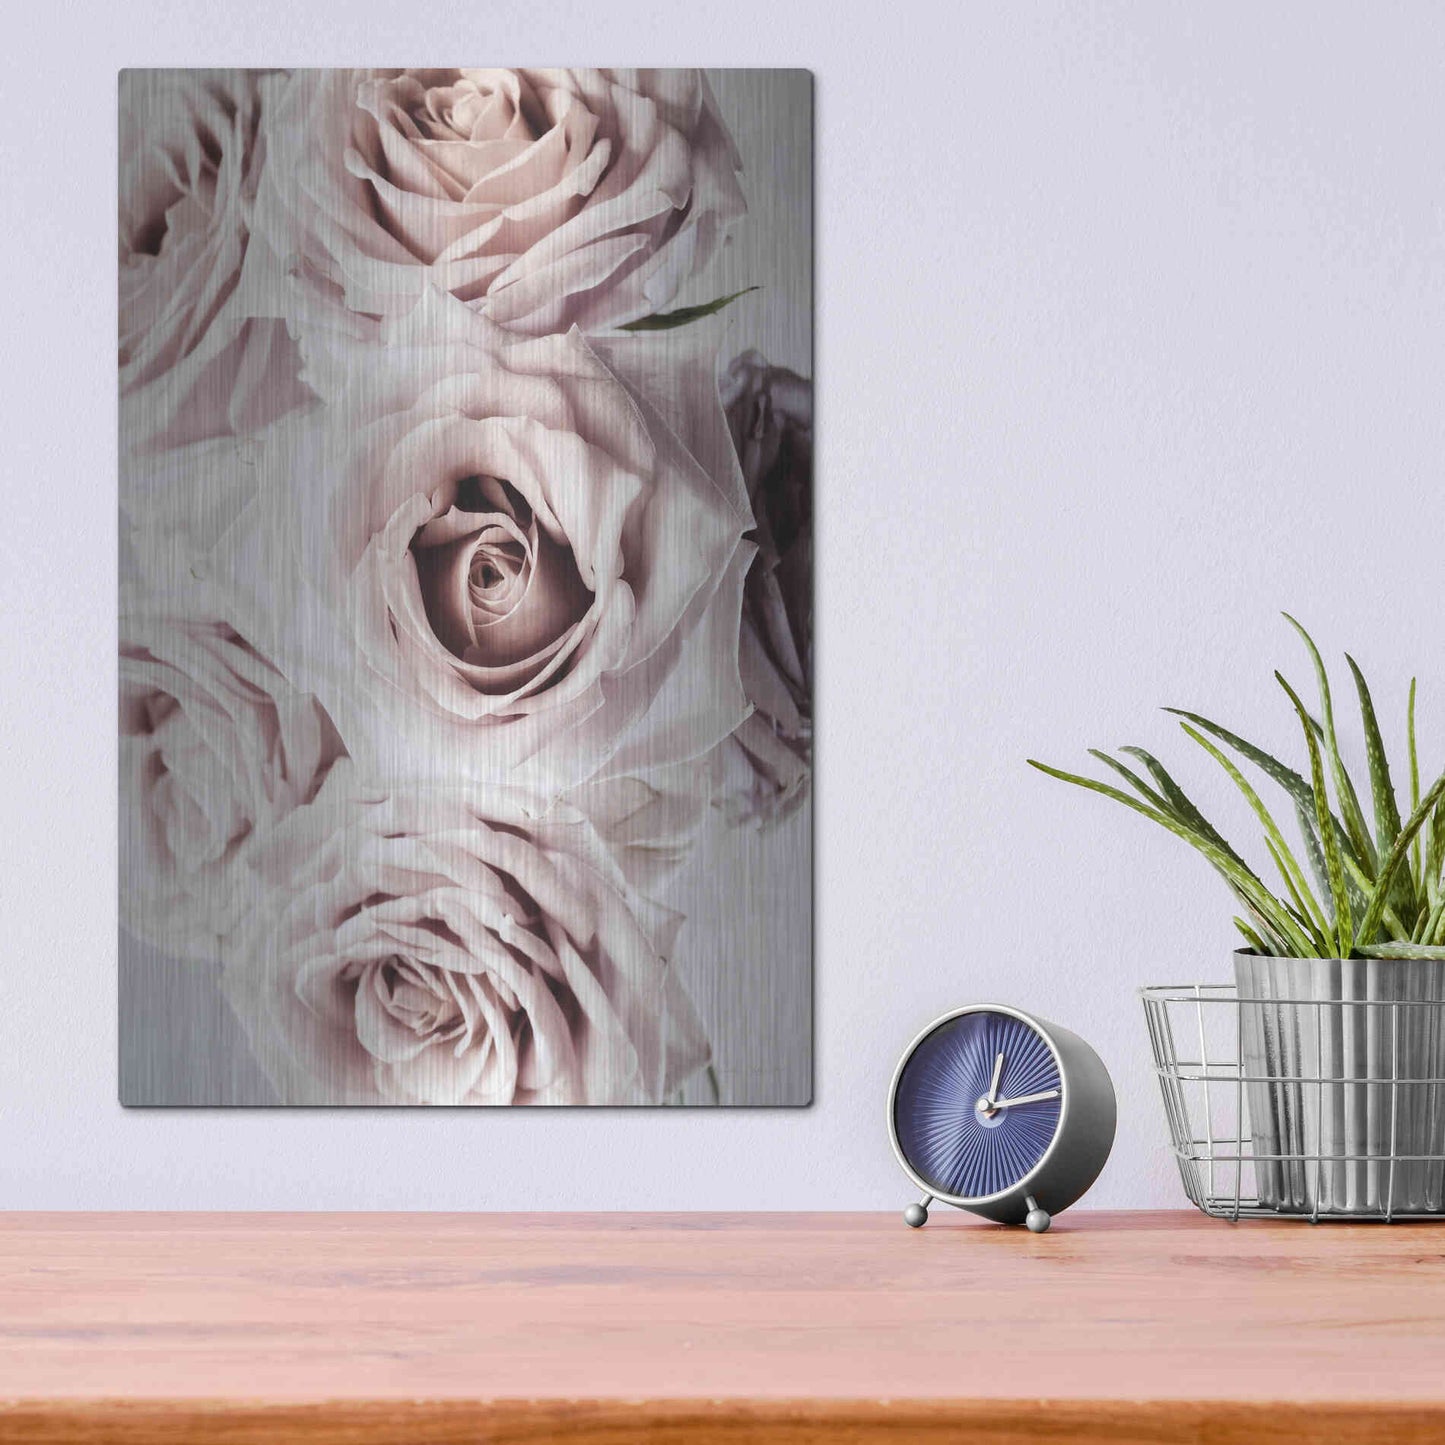 Luxe Metal Art 'Dusty Rose Cluster' by Elise Catterall, Metal Wall Art,12x16